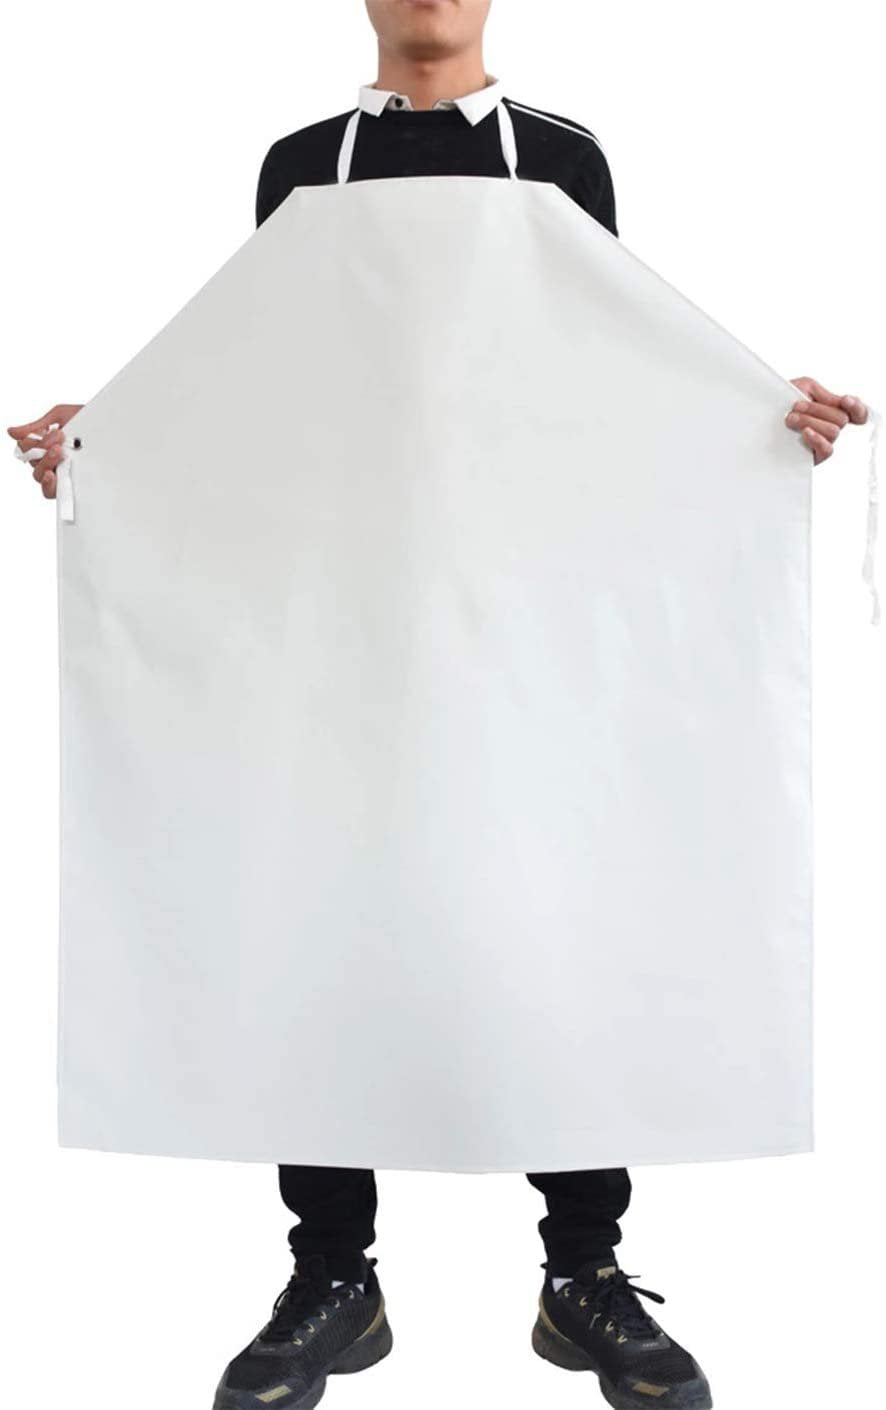 WHITE POLYTHENE PLASTIC APRONS SEALED PACKAGING 100 X APRONS DISPOSABLE BLUE